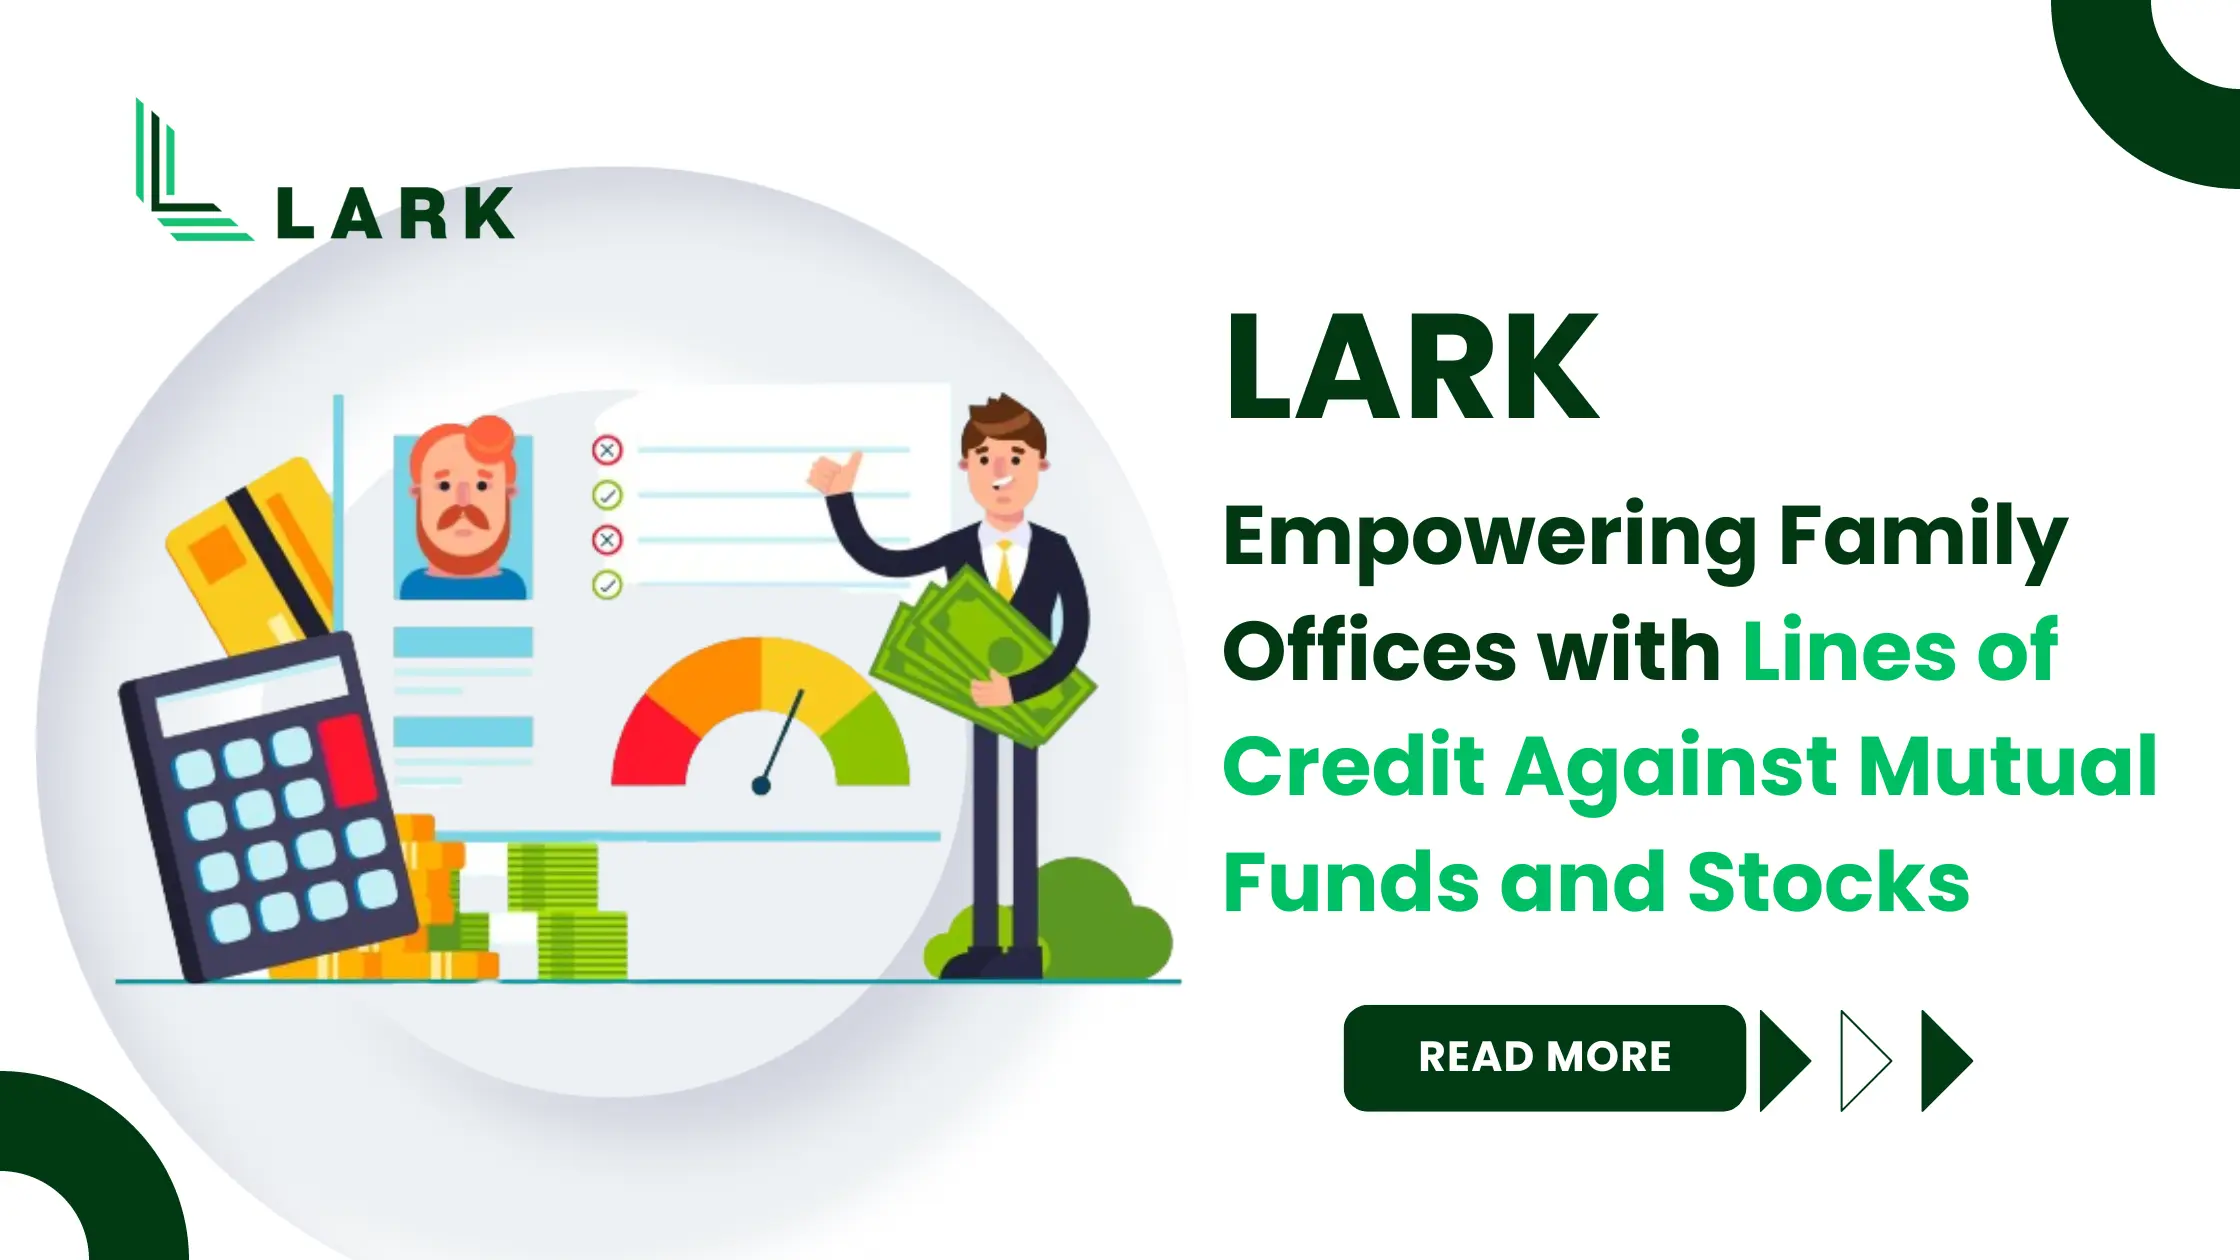 LARK: Empowering Family Offices with Lines of Credit Against Mutual Funds and Stocks